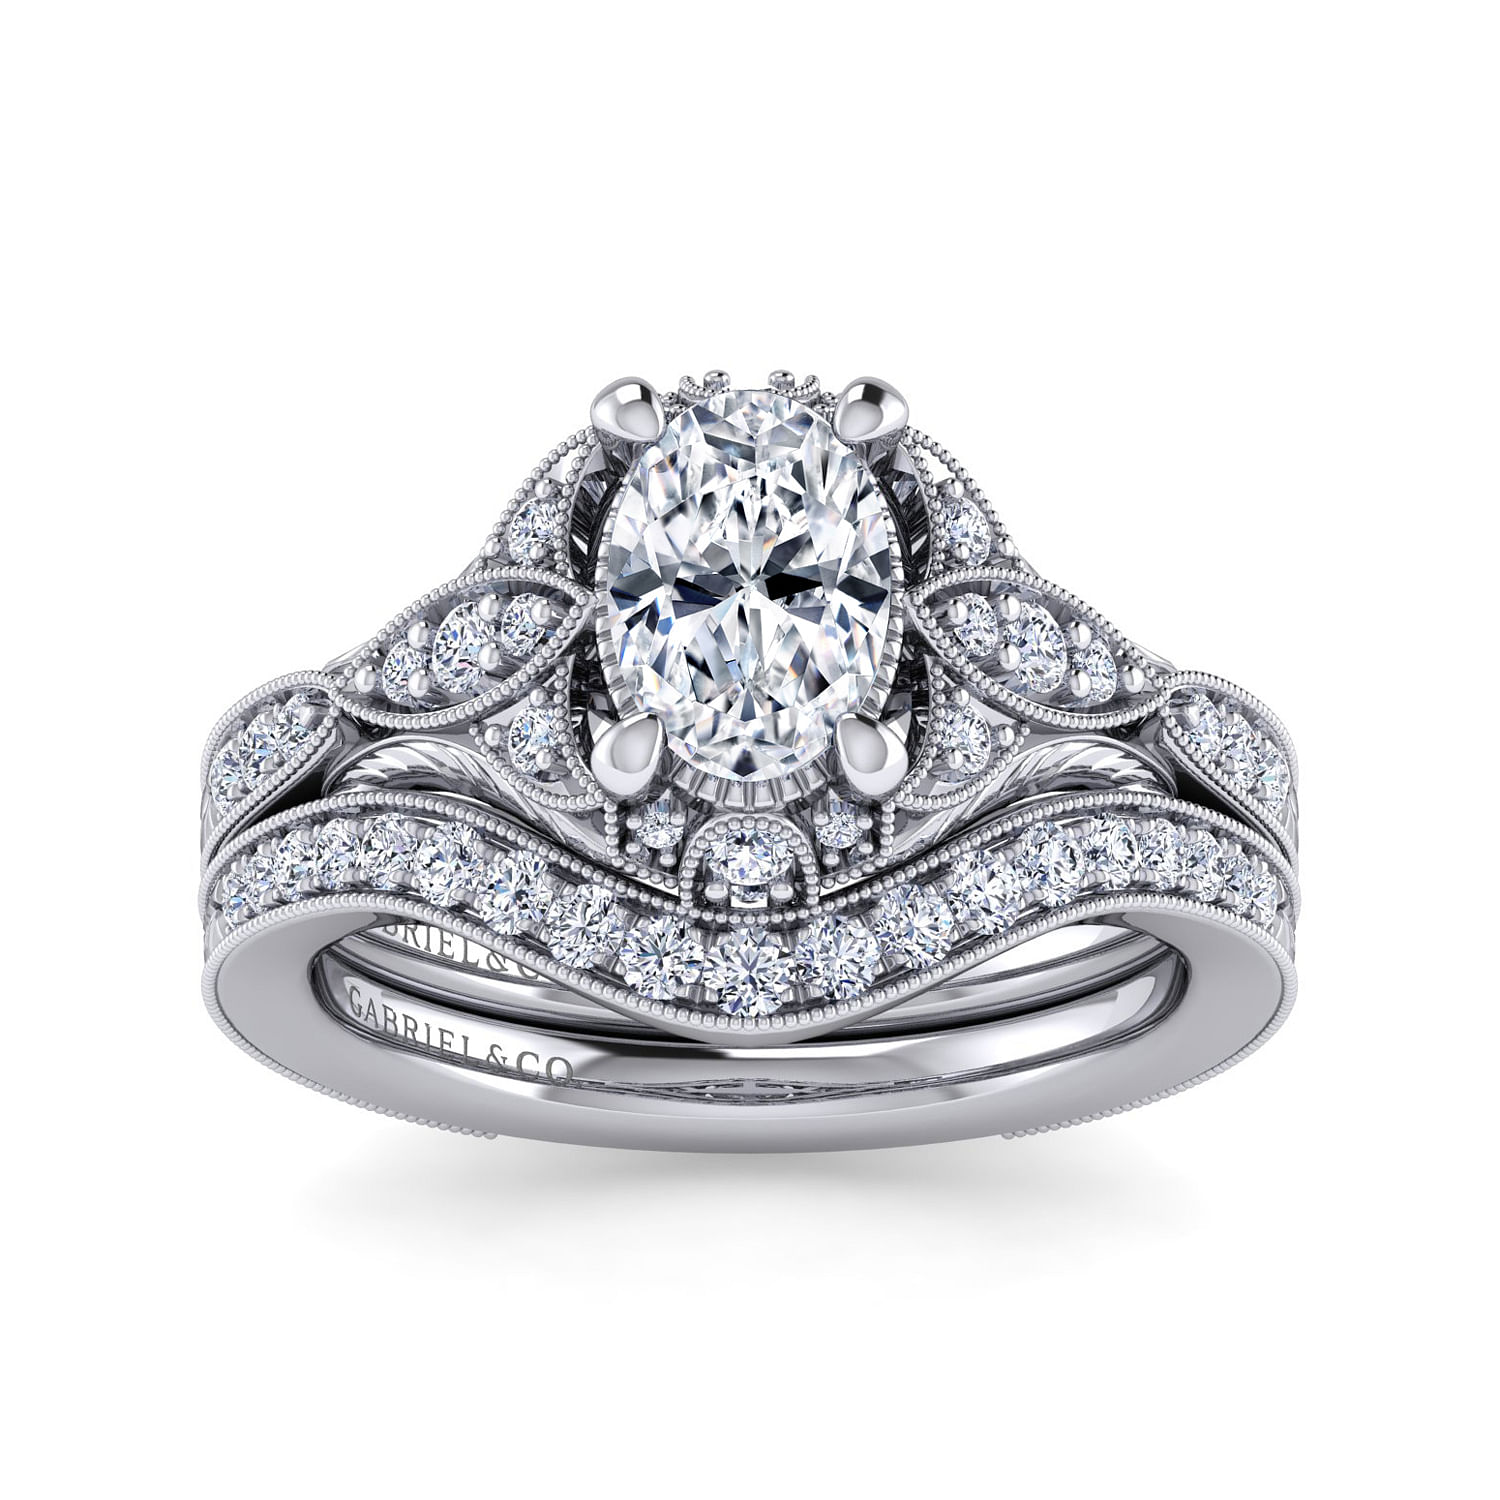 Unique 14K White Gold Vintage Inspired Oval Halo Diamond Engagement Ring